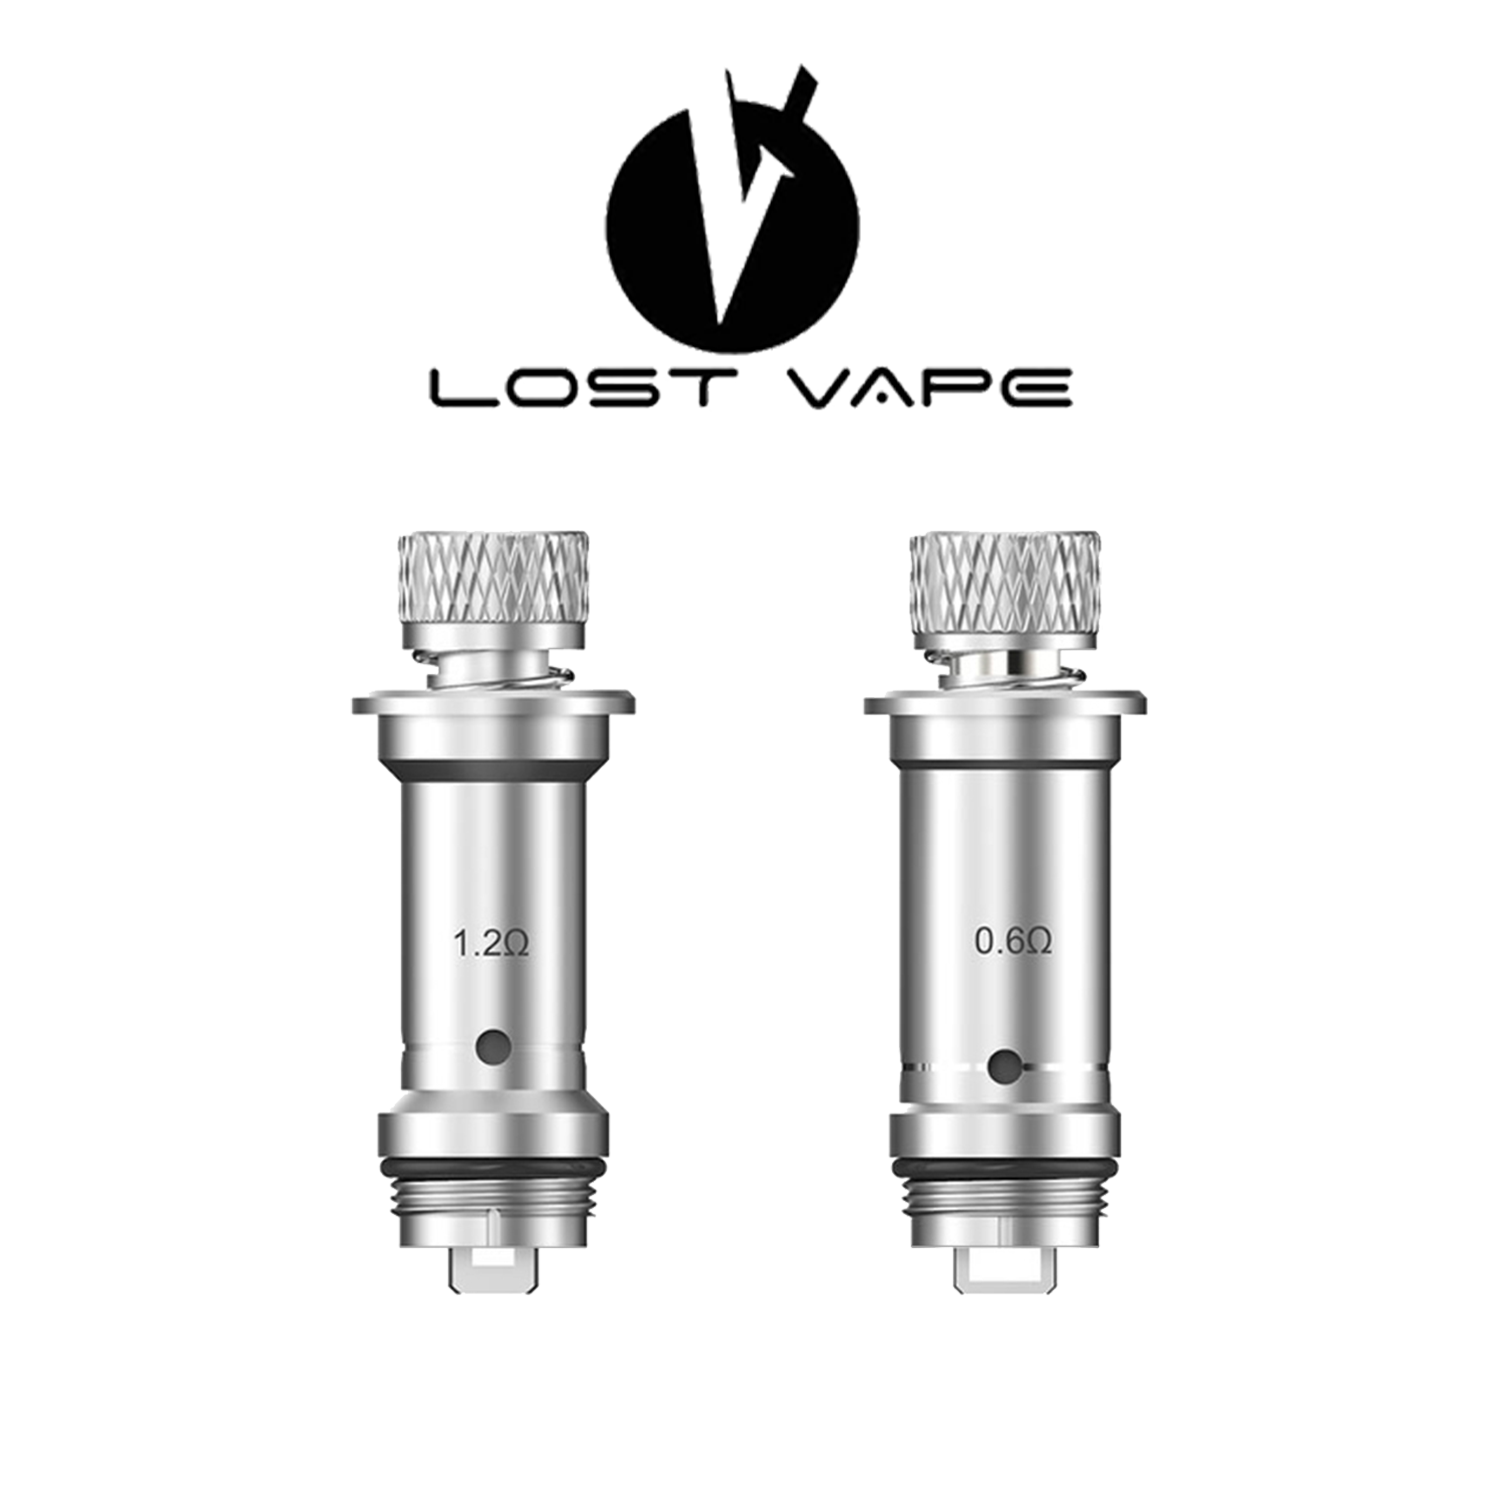 LOST VAPE LYRA REPLACEMENT COIL (Price Per Coil) - Boss Vapes